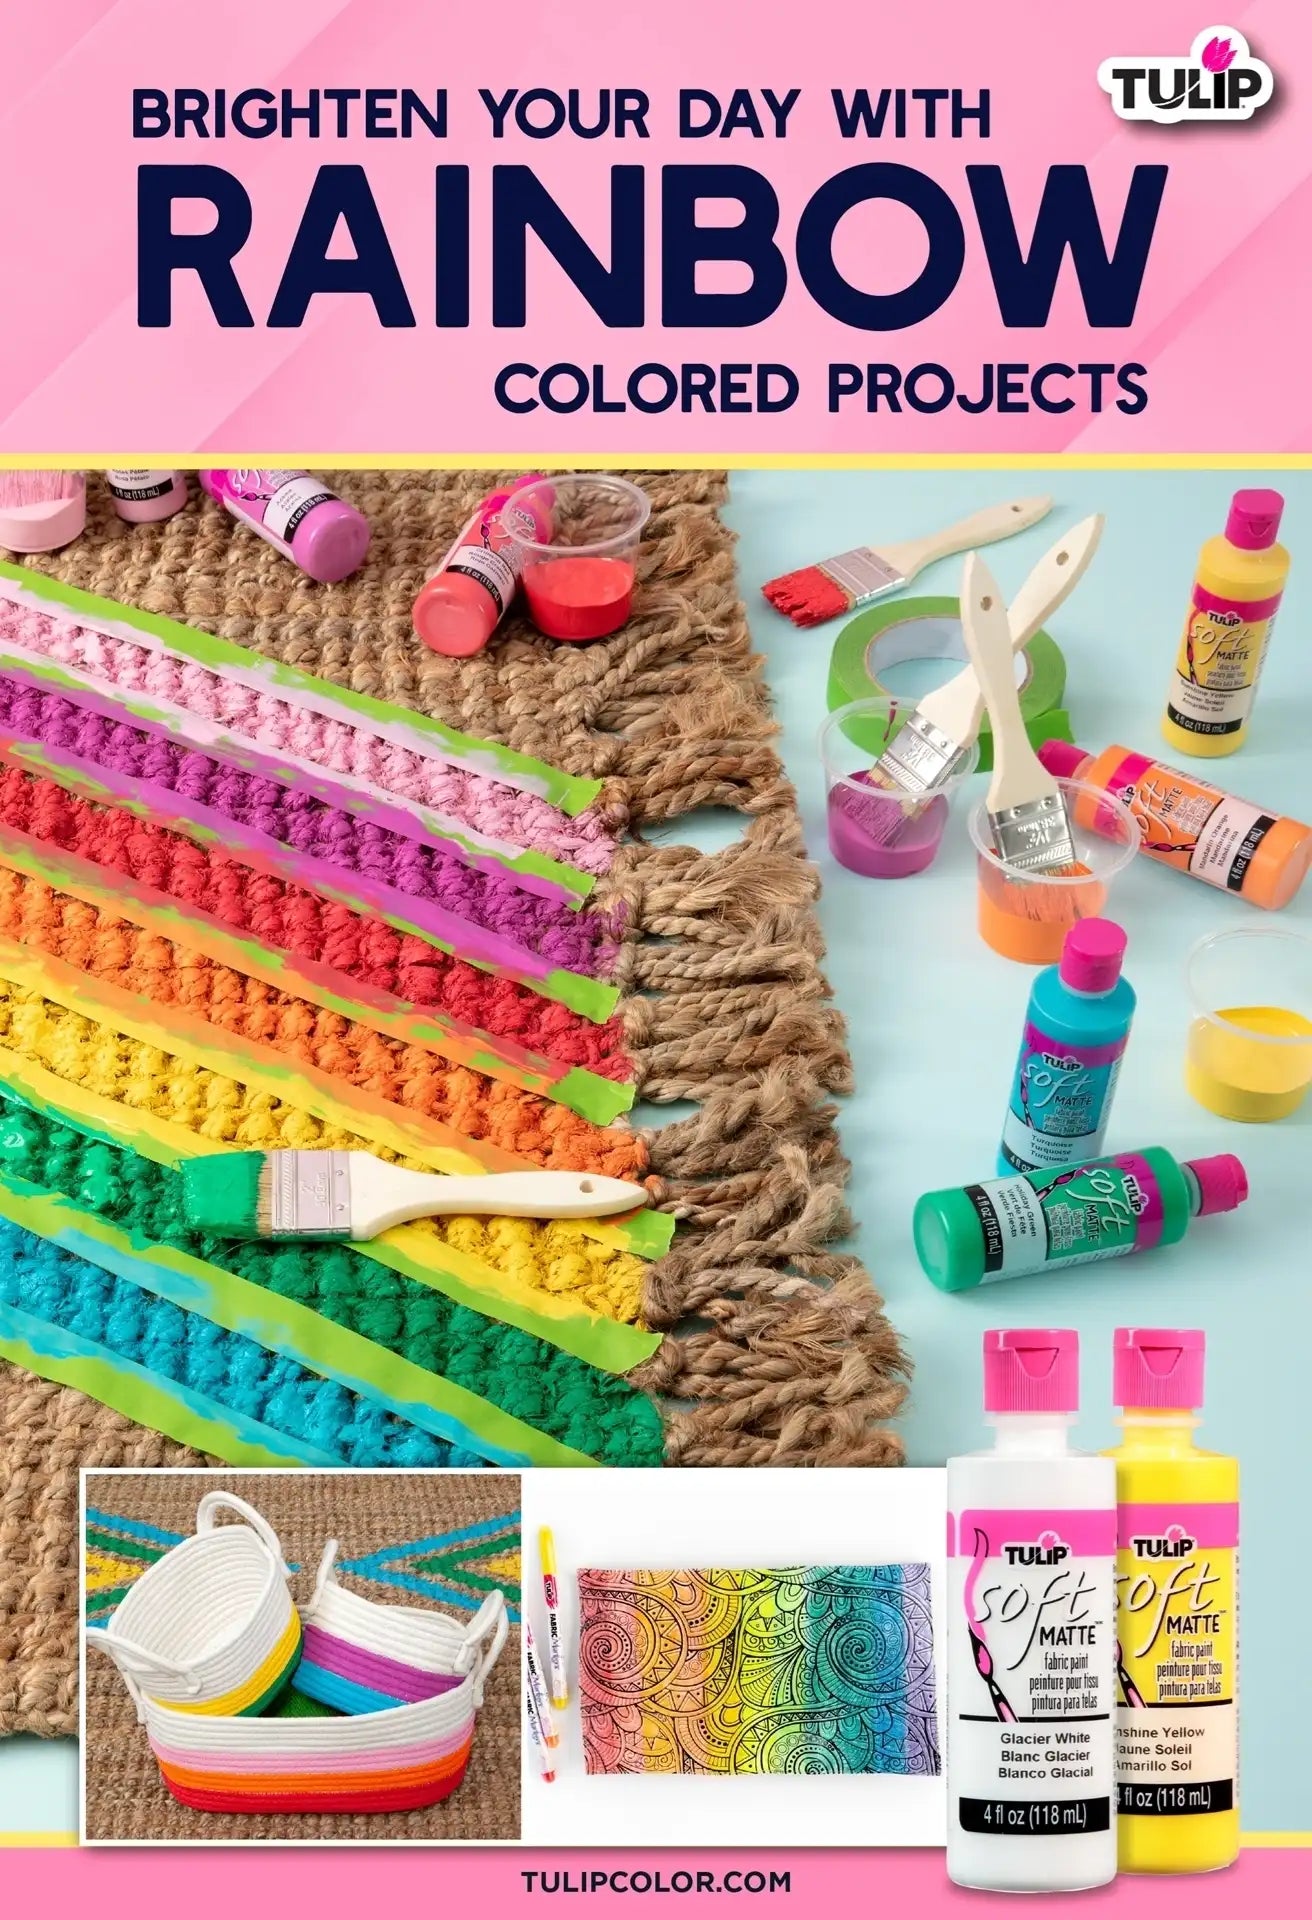 Brighten Your Day with these 10 Rainbow Colored Projects